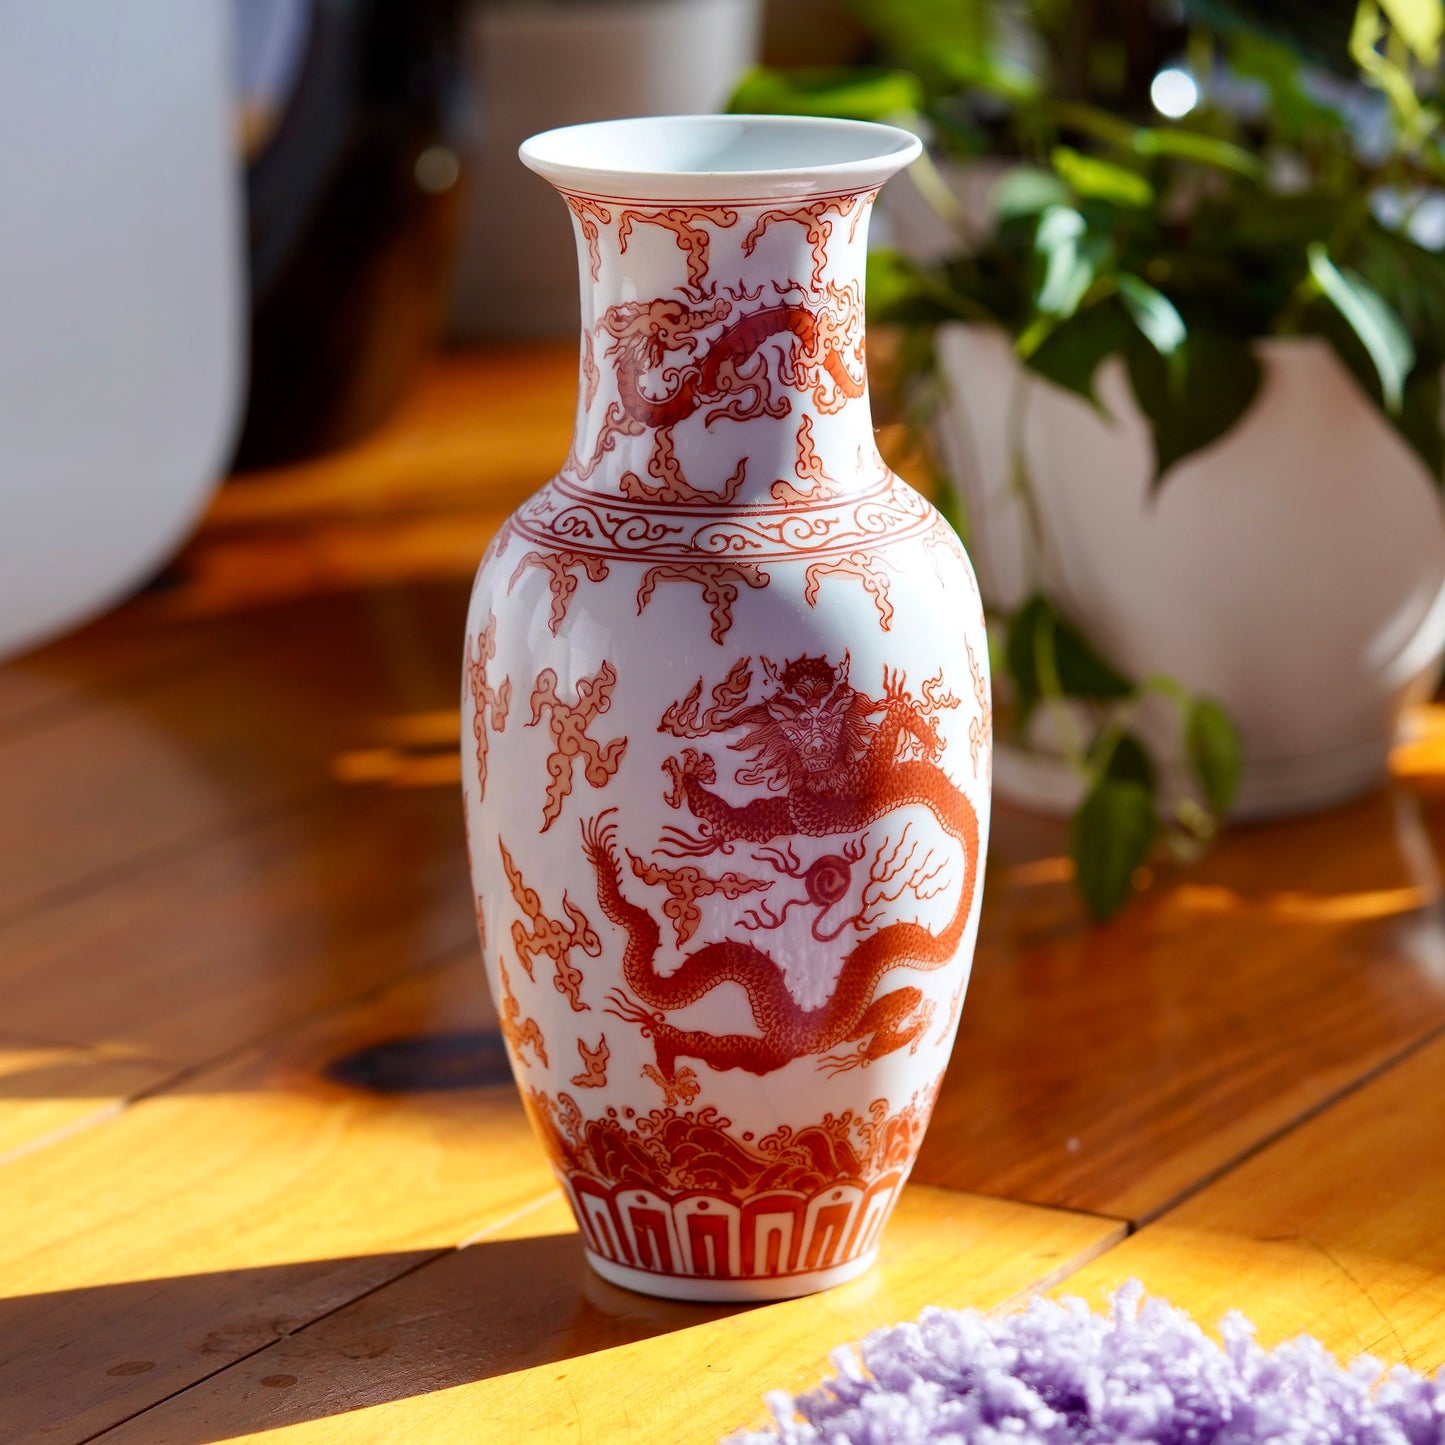 Vintage orange and white hand painted Japanese porcelain vase with  dragons, displayed on wood floor with potted plant in background